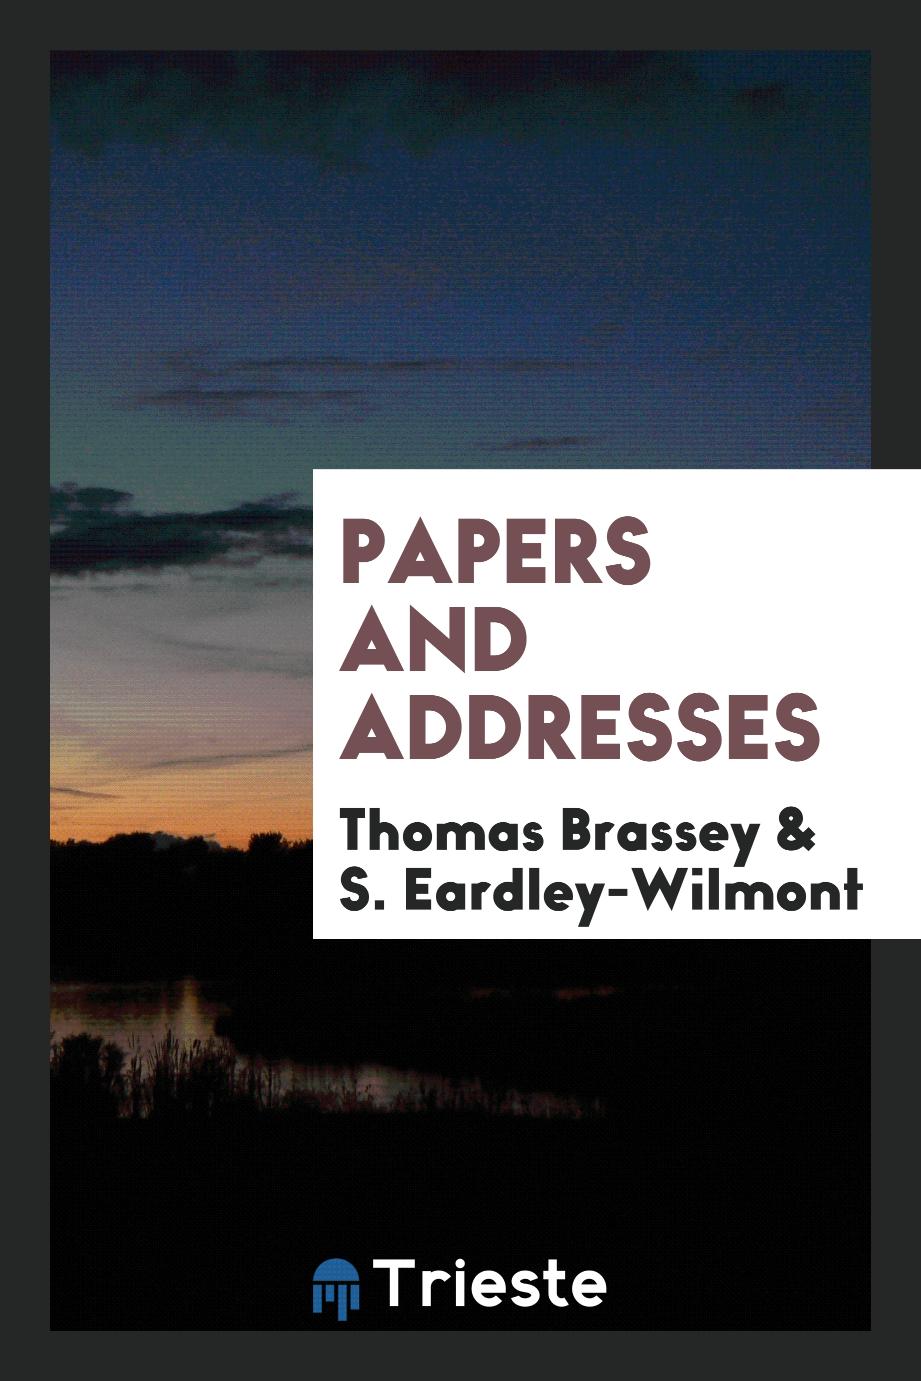 Papers and addresses